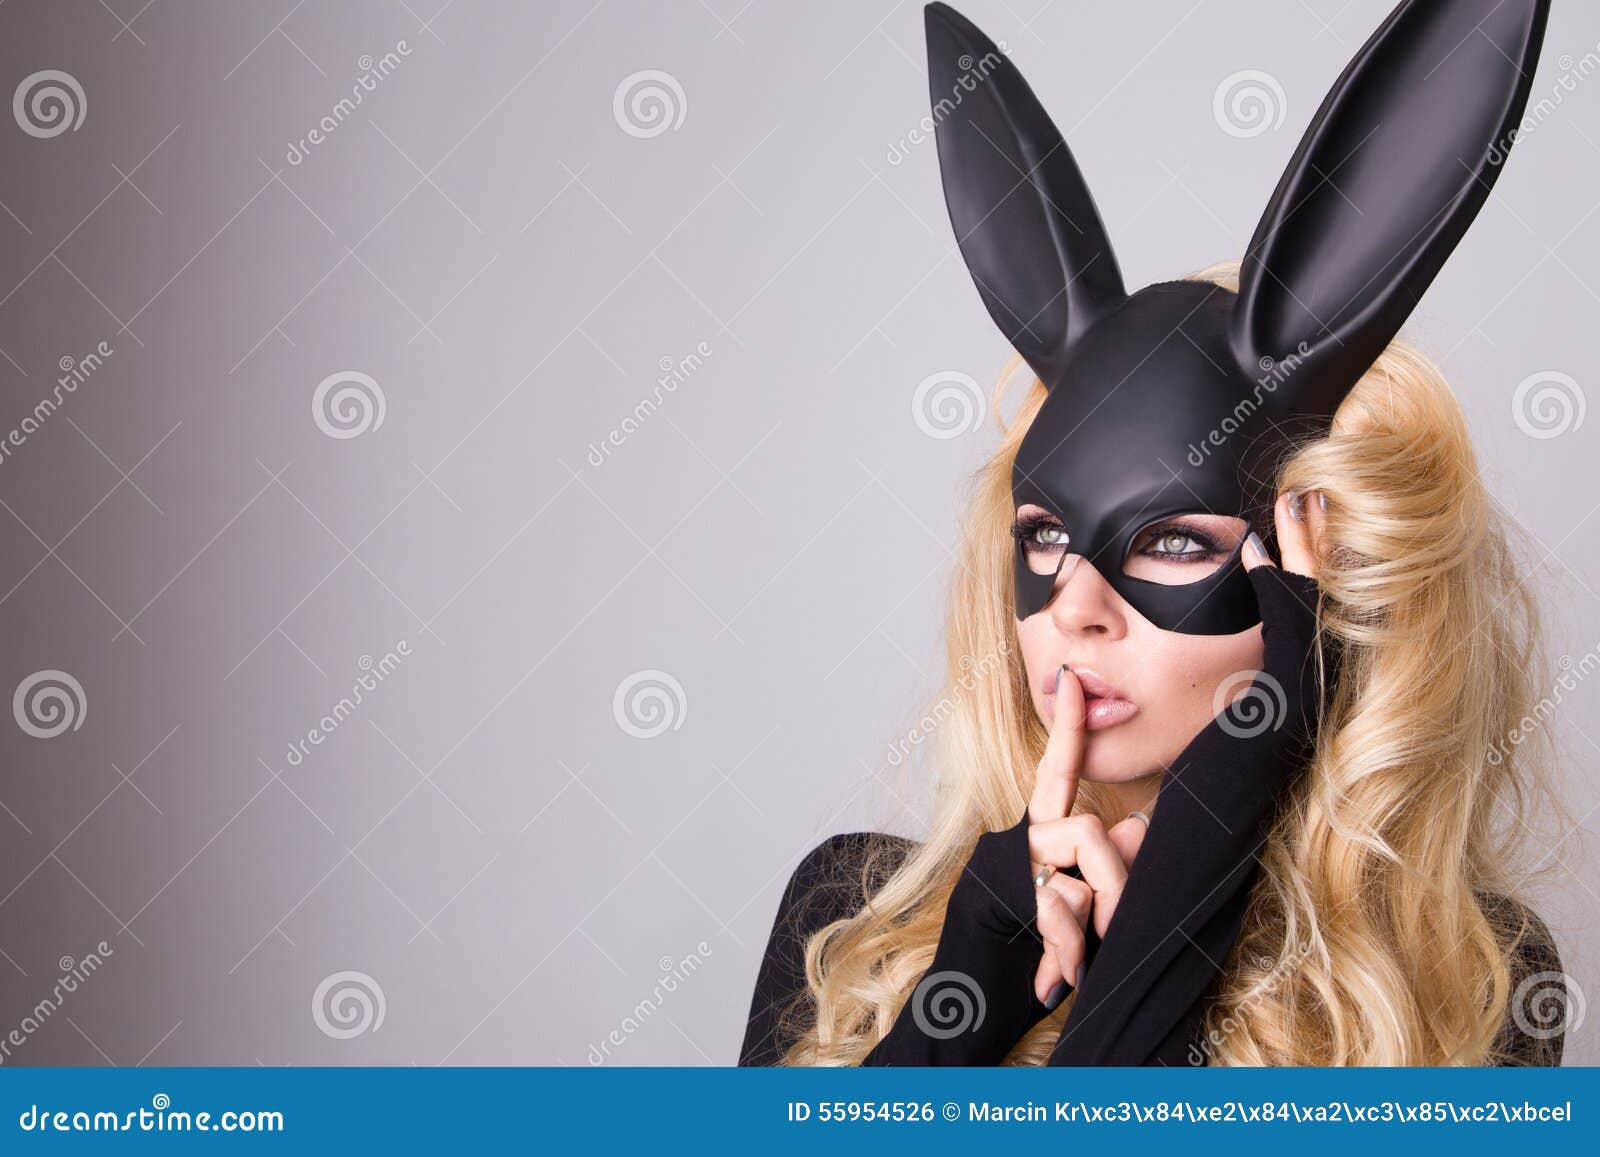 beautiful blonde-haired young woman in carnival mask ballroom rabbit with long ears sensual in a black dress, standing defian